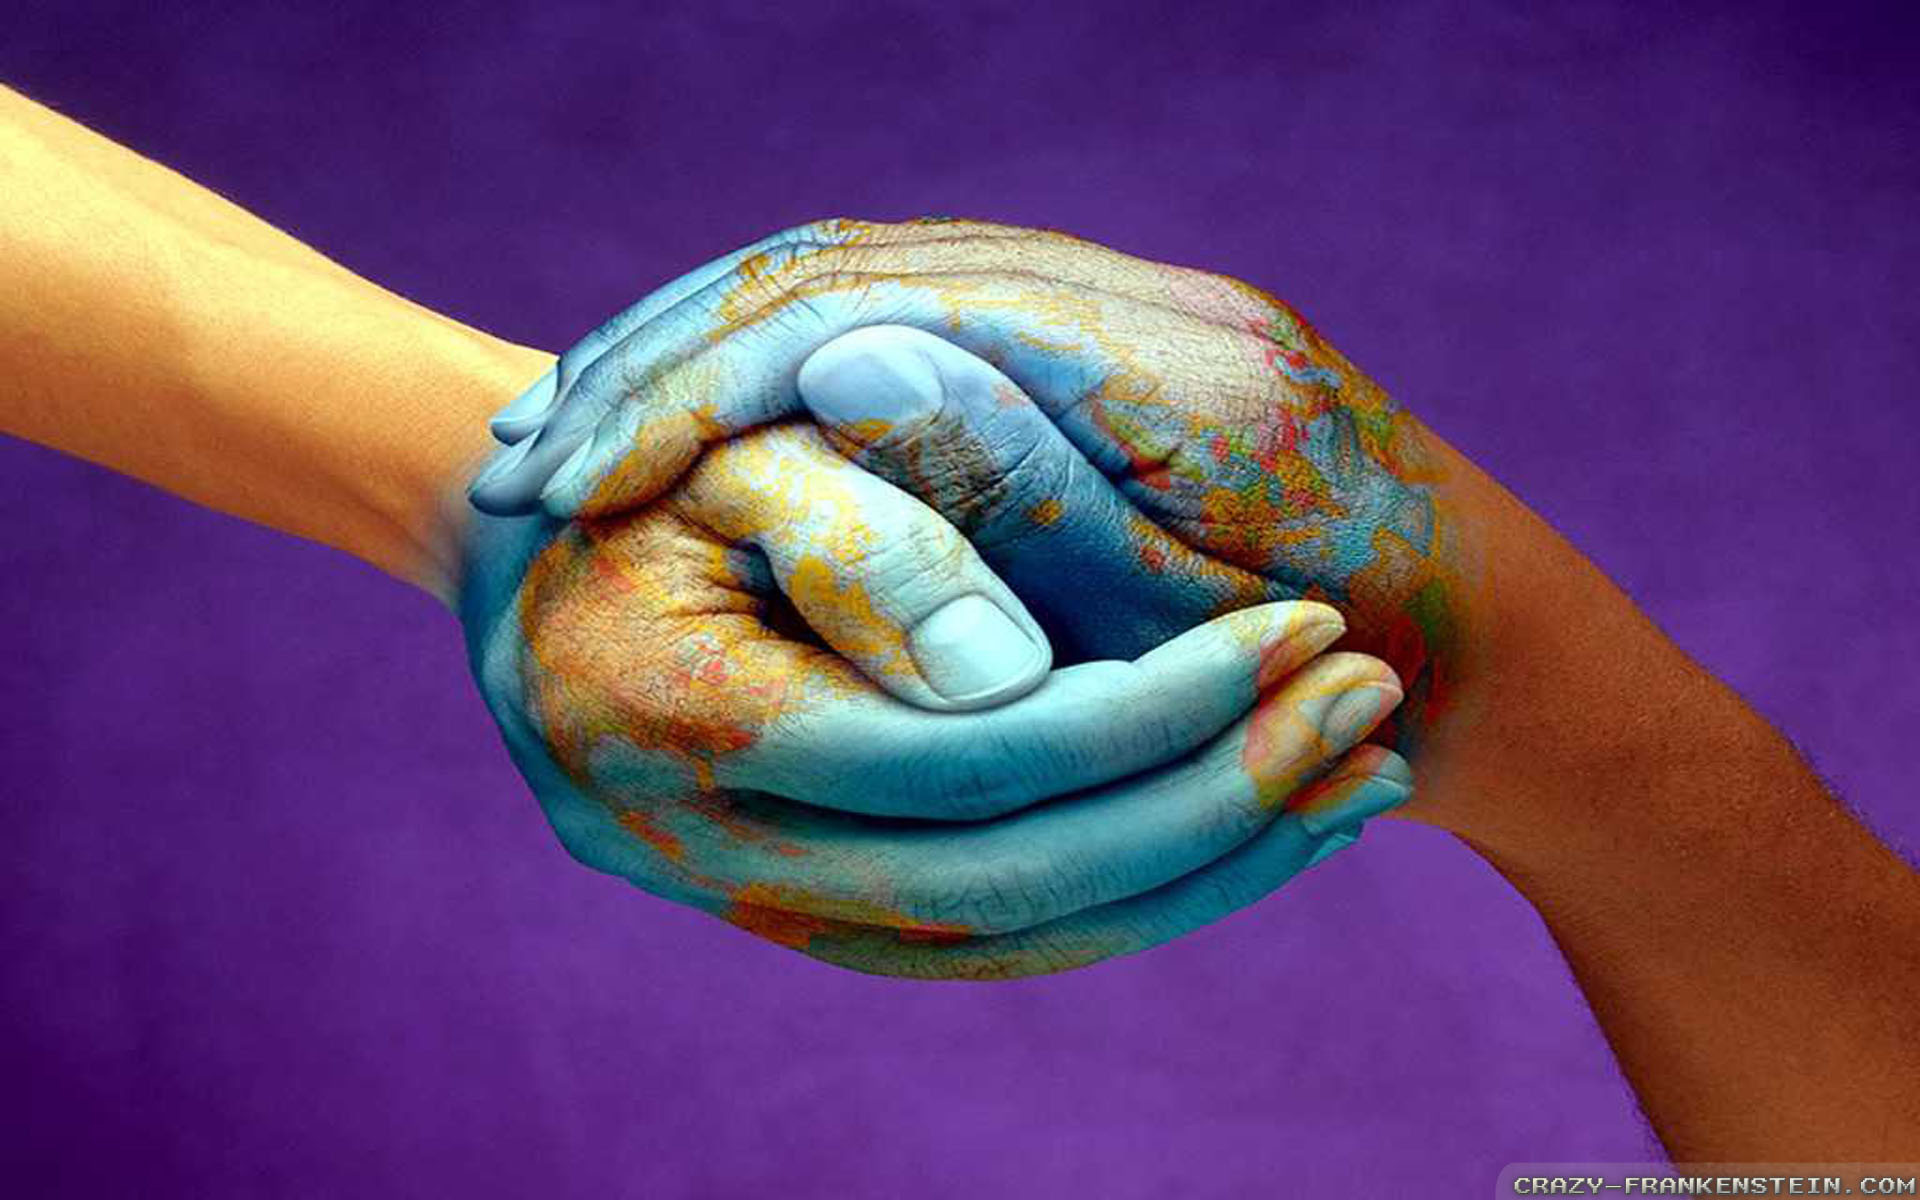 1920x1200 Wallpaper: World peace in our hands wallpapers. Resolution: 1024x768 |  1280x1024 | 1600x1200. Widescreen Res: 1440x900 | 1680x1050 | 